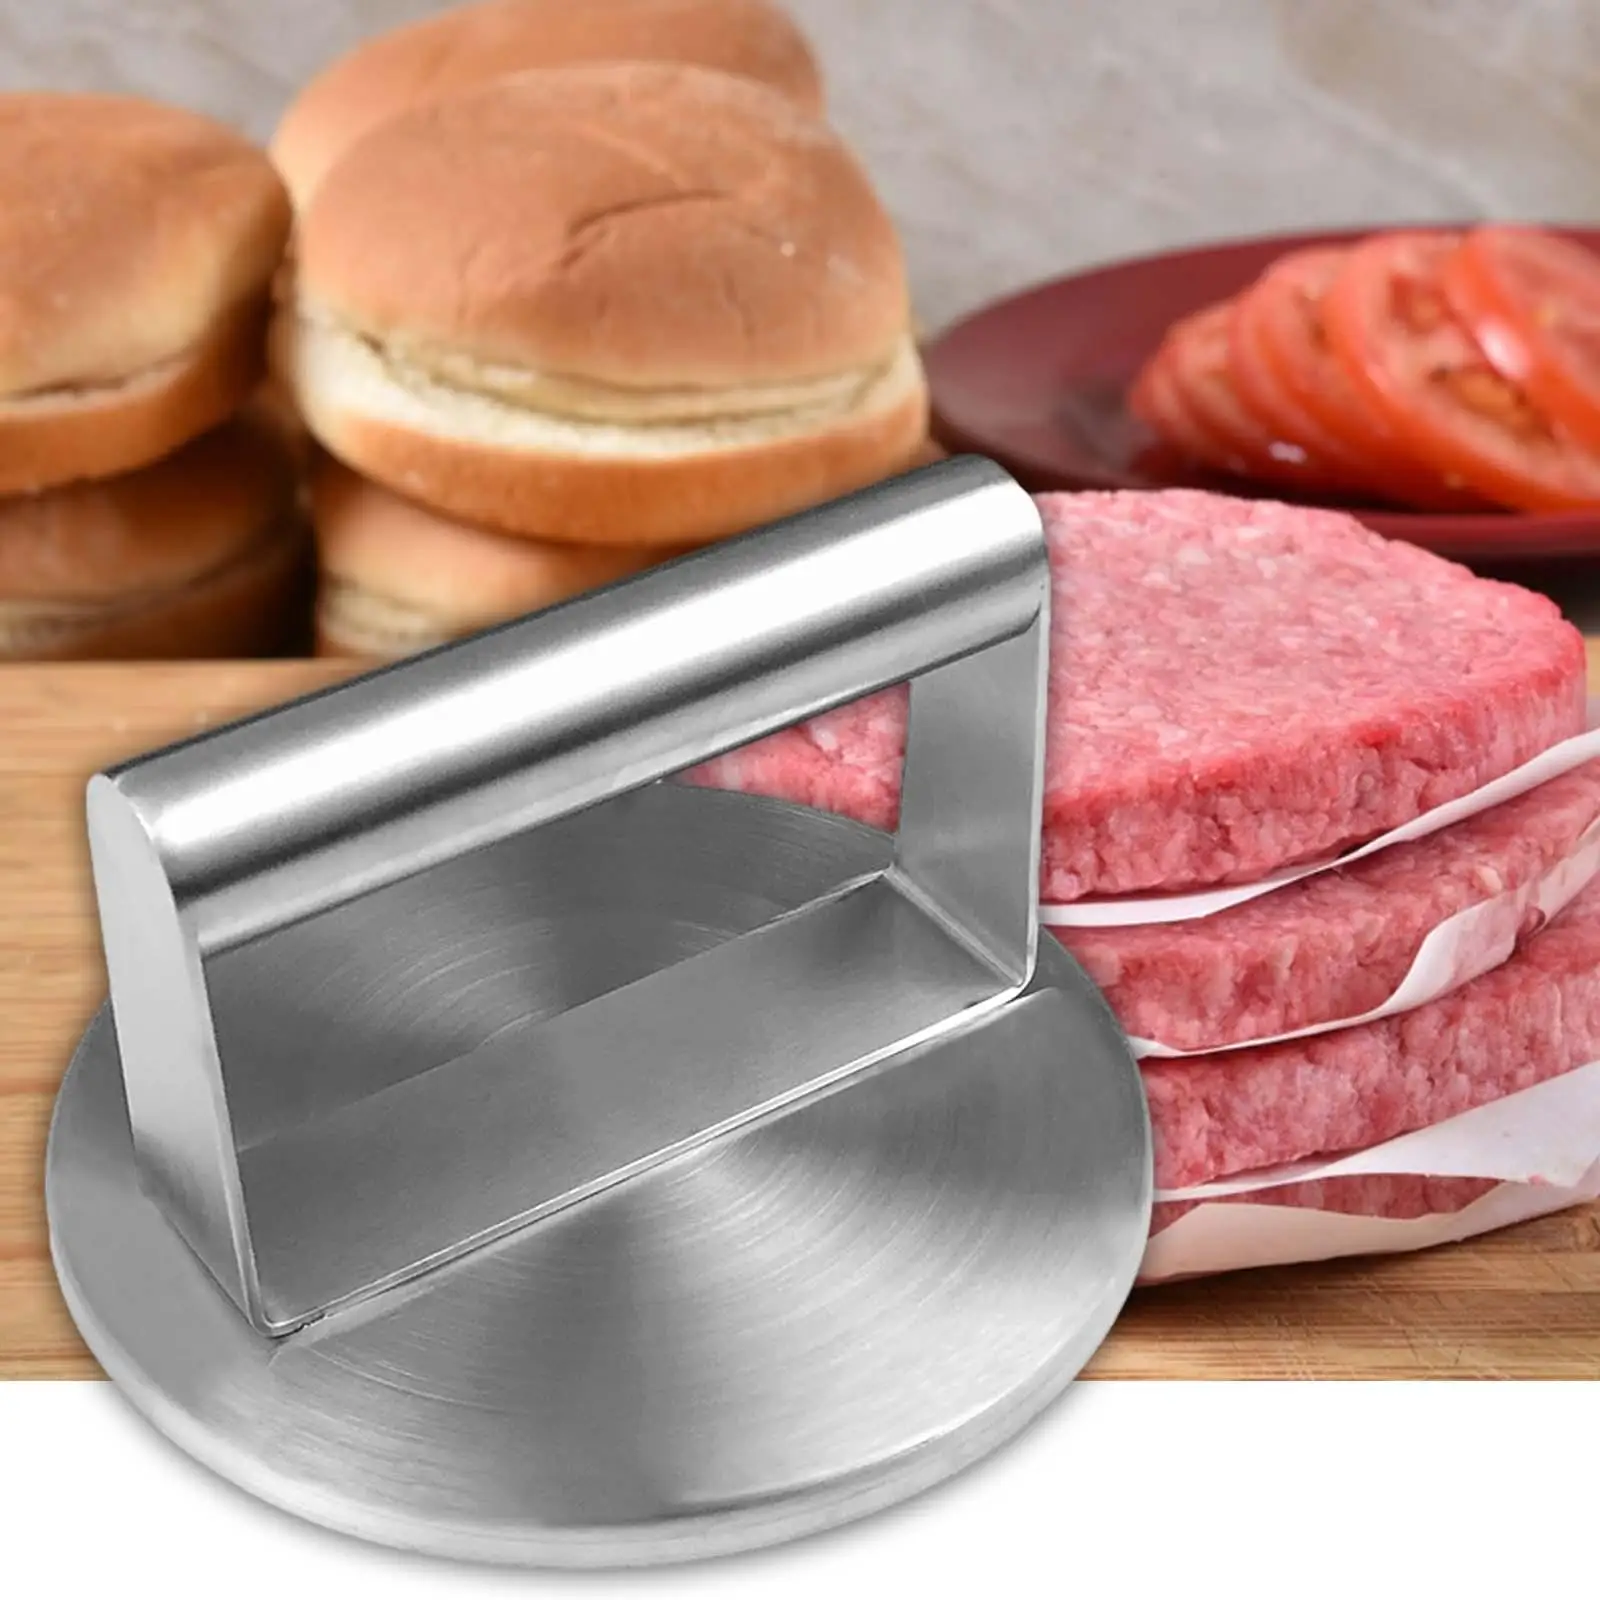 5.94inch Round Burger Presses Beef Meatballs Maker Hamburger Patty Maker for Cooking BBQ Griddle Accessories Grilling Tool